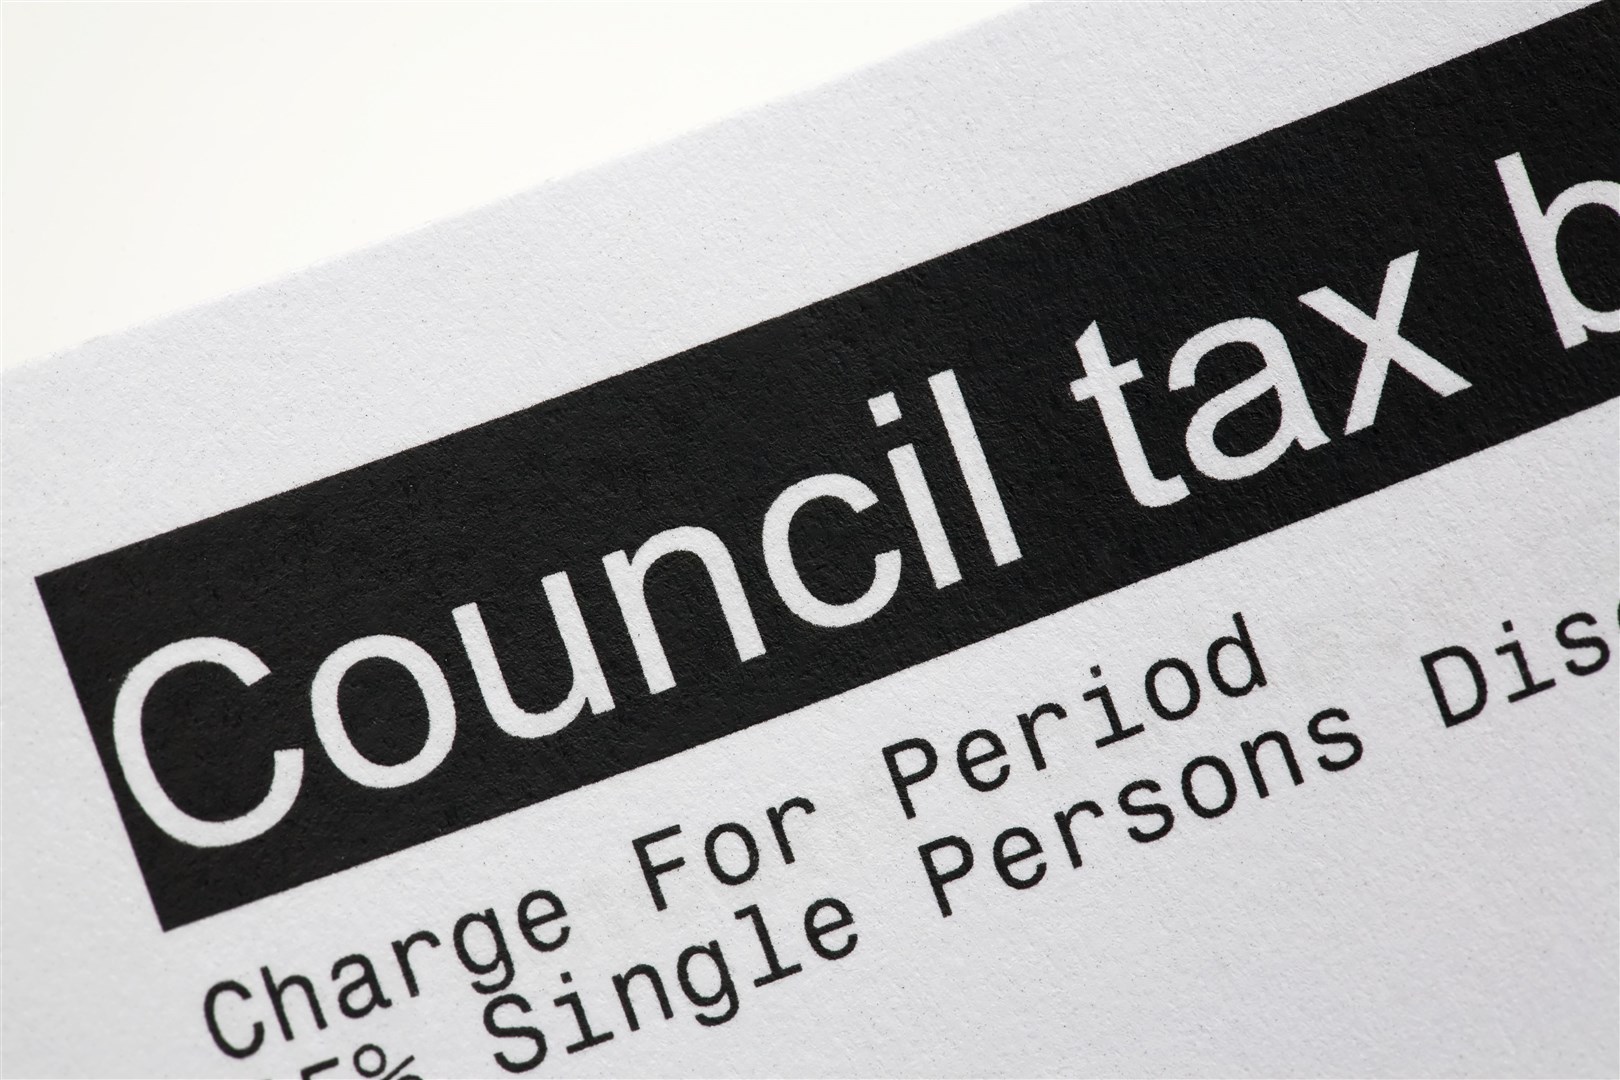 Scottish Government Council Tax hikes would make 33,000 Highland households 'poorer' under 'bombshell' plans.